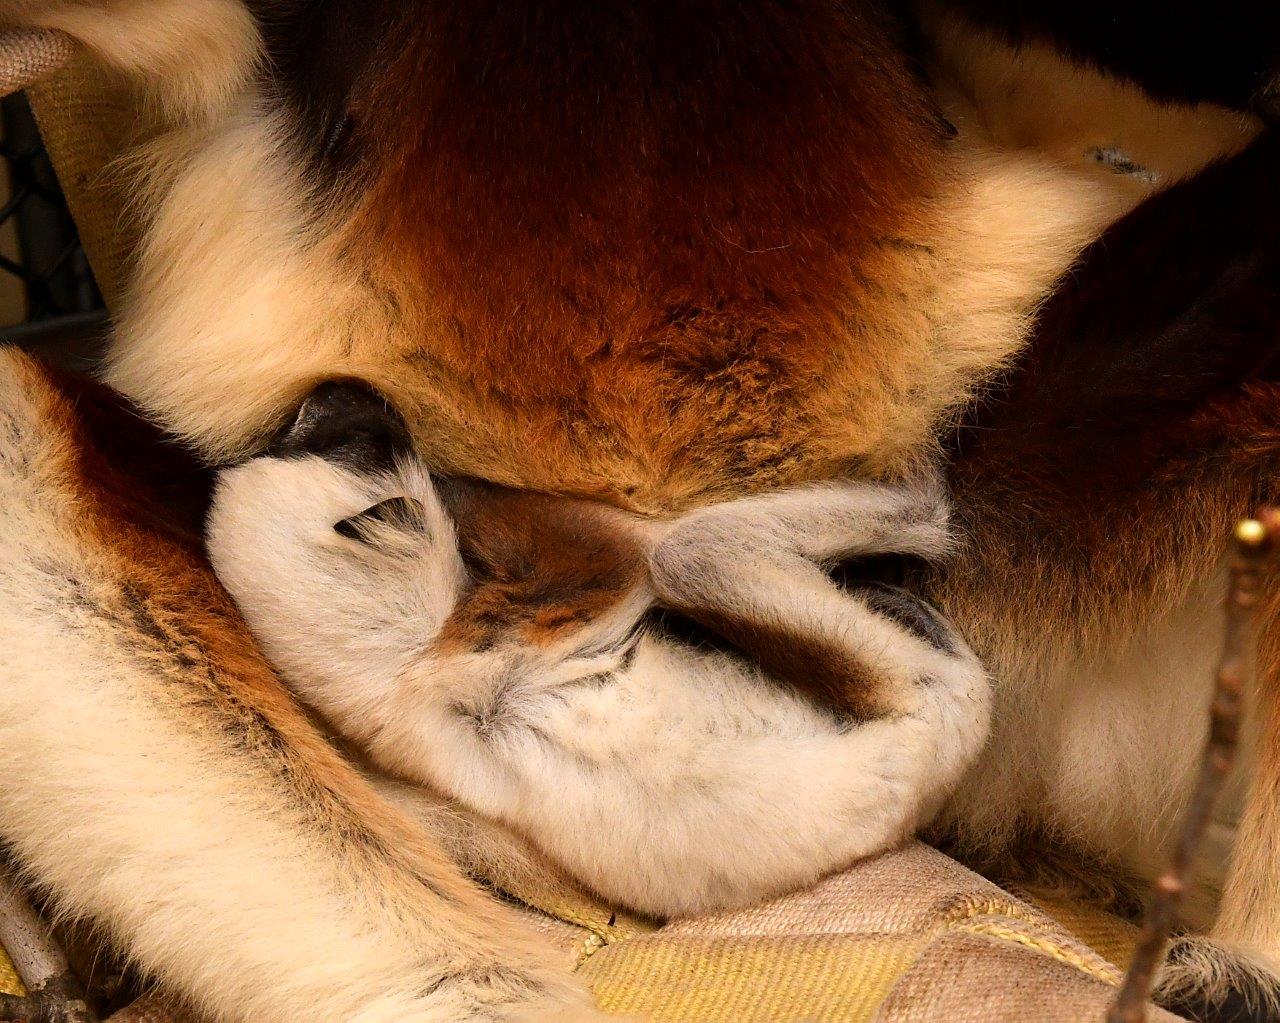 Infant sifaka sleeping in mother's lap